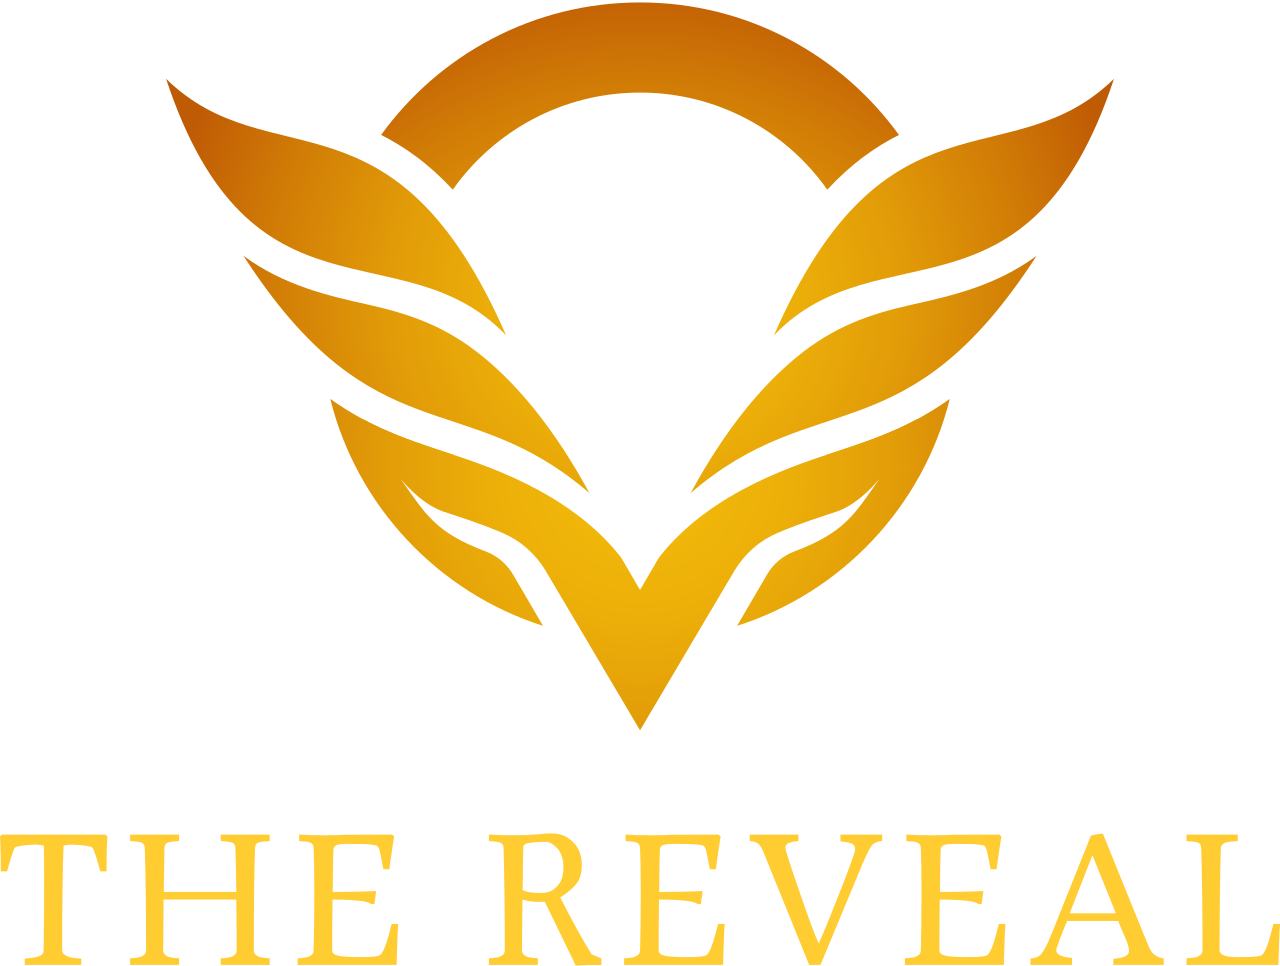 The Reveal's web page